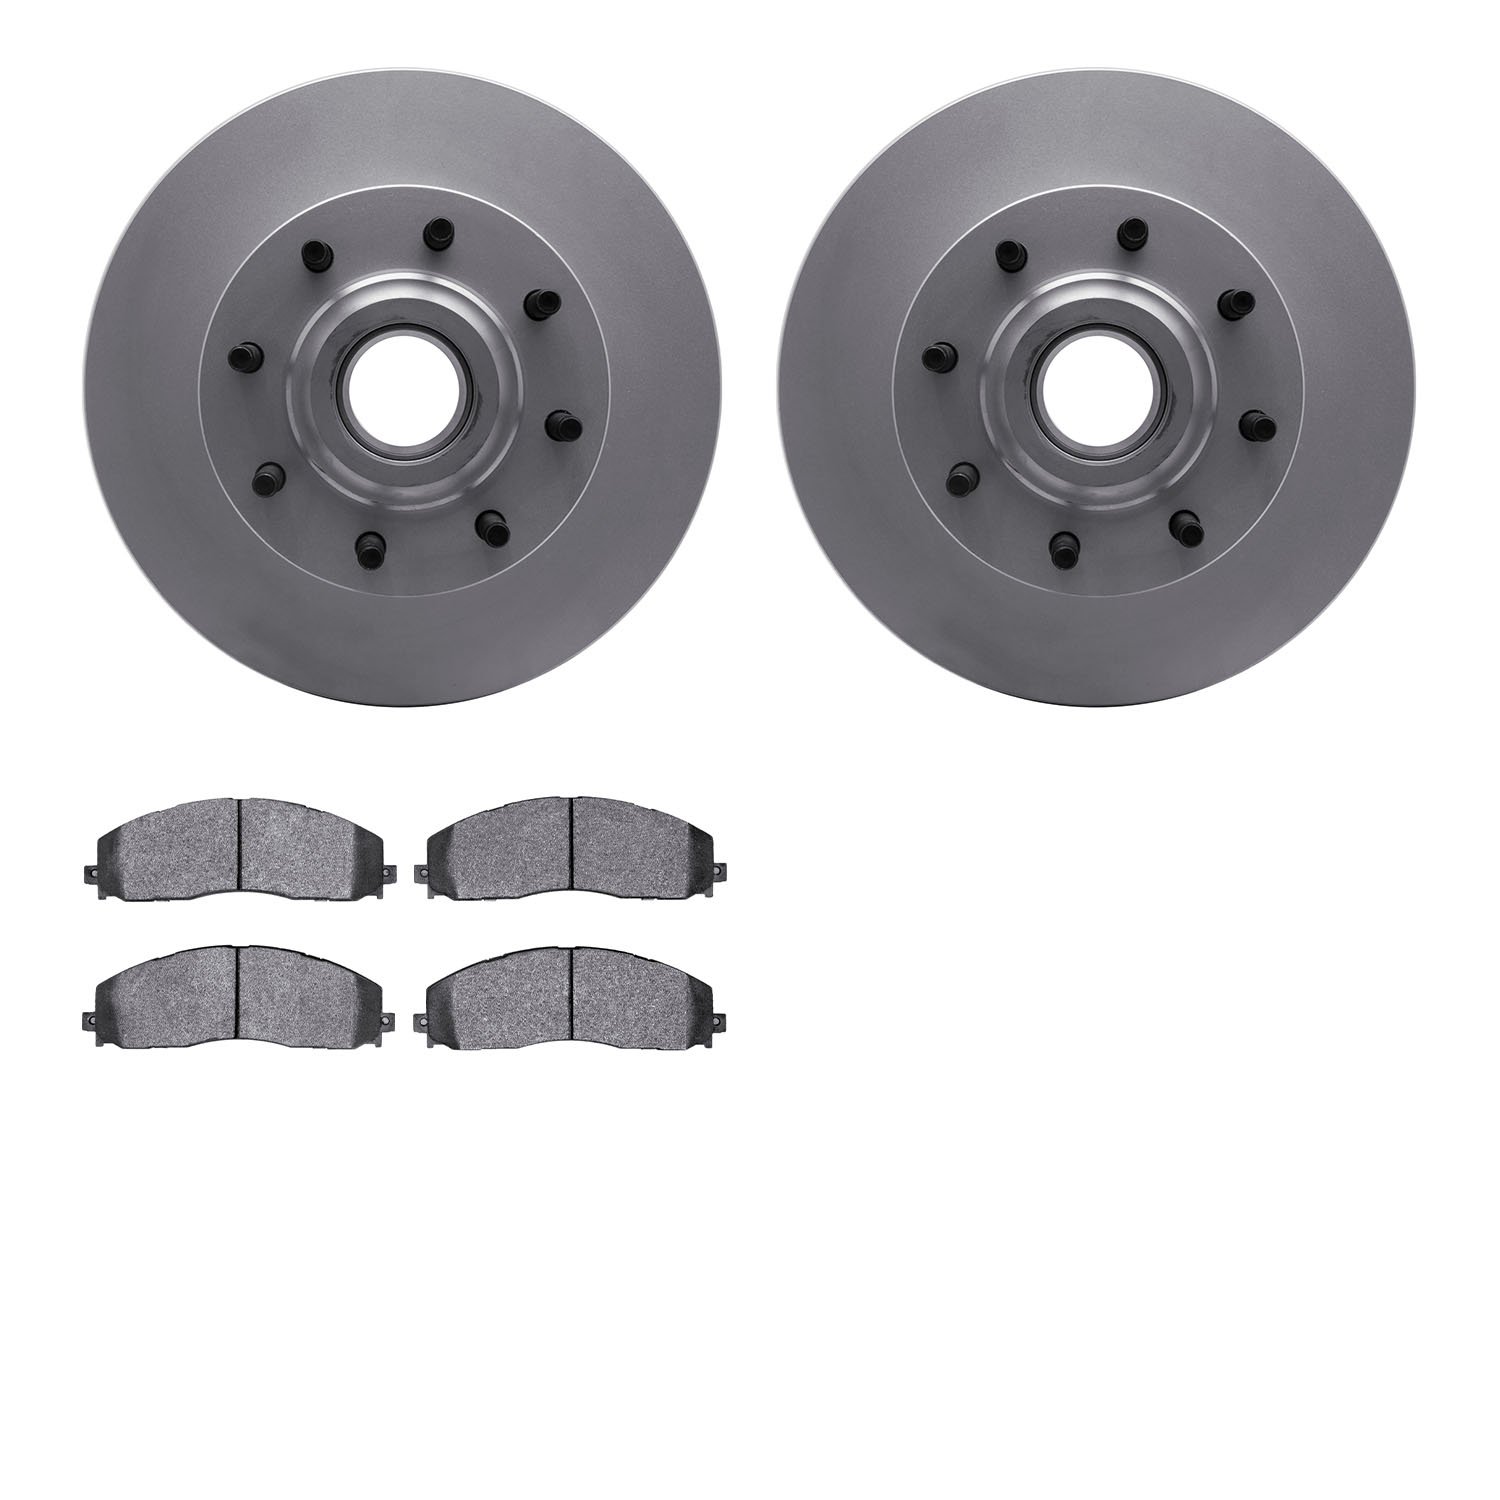 4202-99192 Geospec Brake Rotors w/Heavy-Duty Brake Pads Kit, Fits Select Ford/Lincoln/Mercury/Mazda, Position: Front